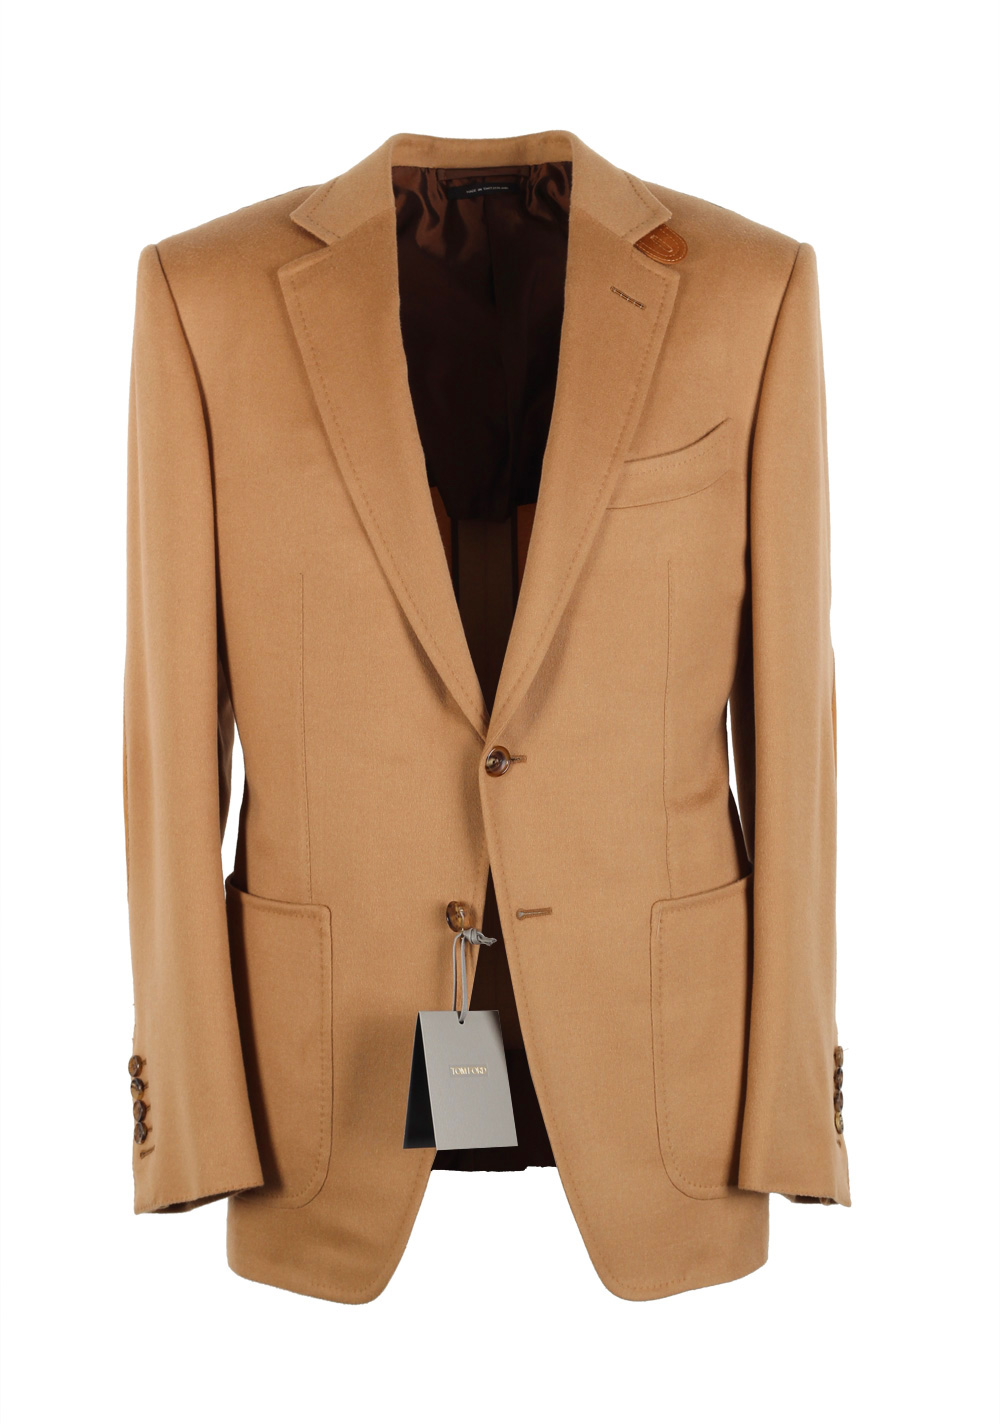 TOM FORD O’Connor Camel Sport Coat Size 48 / 38R U.S. Fit Y in 100% Cashmere | Costume Limité